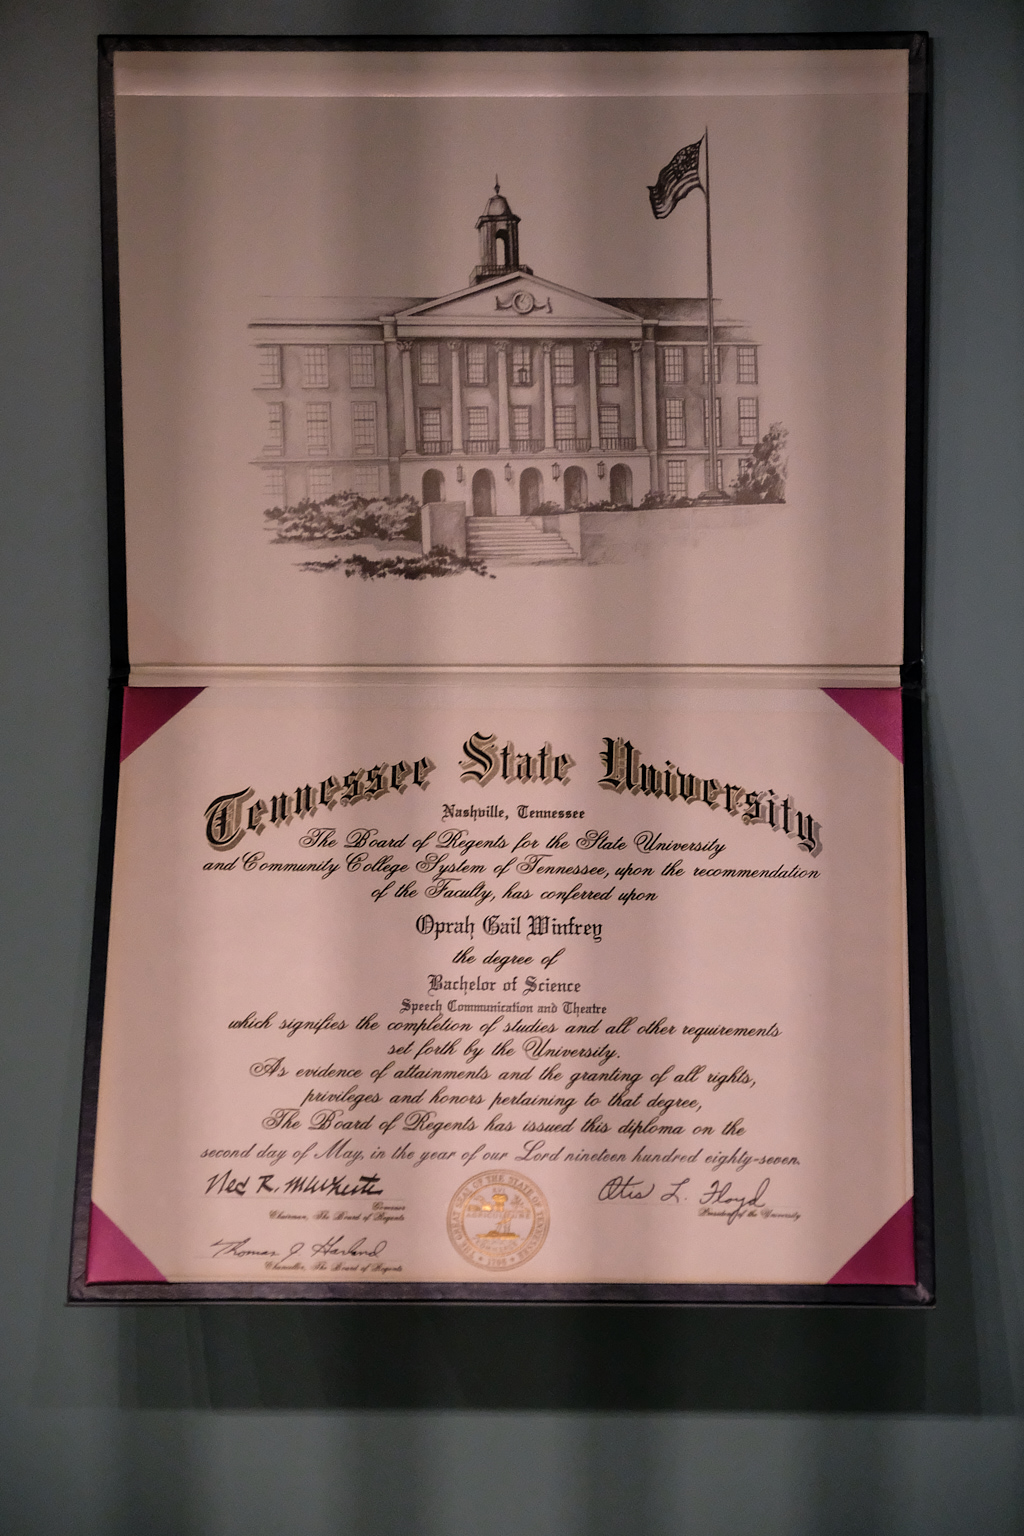  Oprah Winfrey enrolled at TSU in 1971, but left shortly before graduating to take a job at a local television station. In 1987, she completed the coursework to receive her bachelor’s degree and delivered the school’s commencement address. 